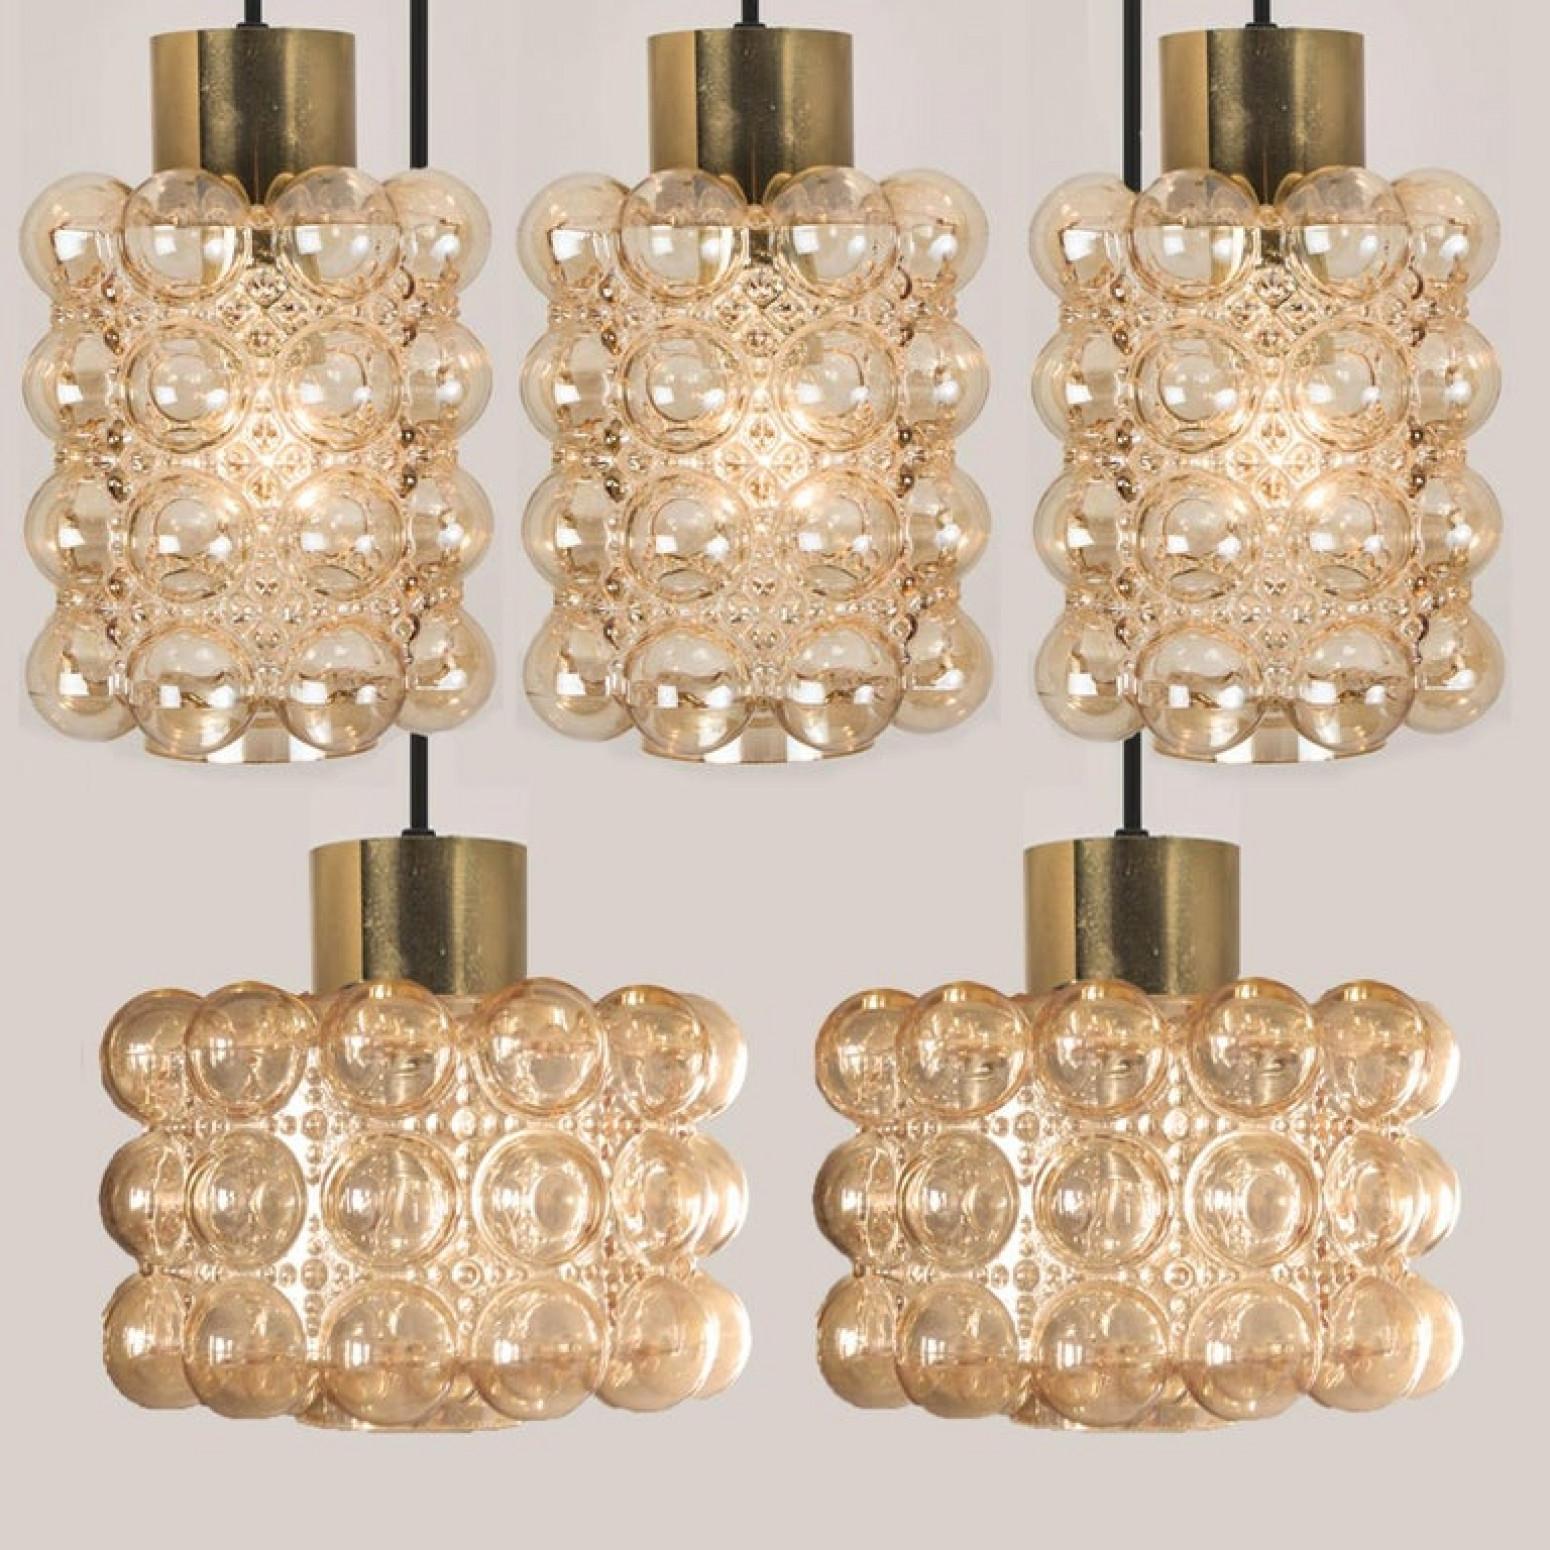 Pair of Glass Wall Lights Sconces by Helena Tynell for Glashütte Limburg, 1960 For Sale 5